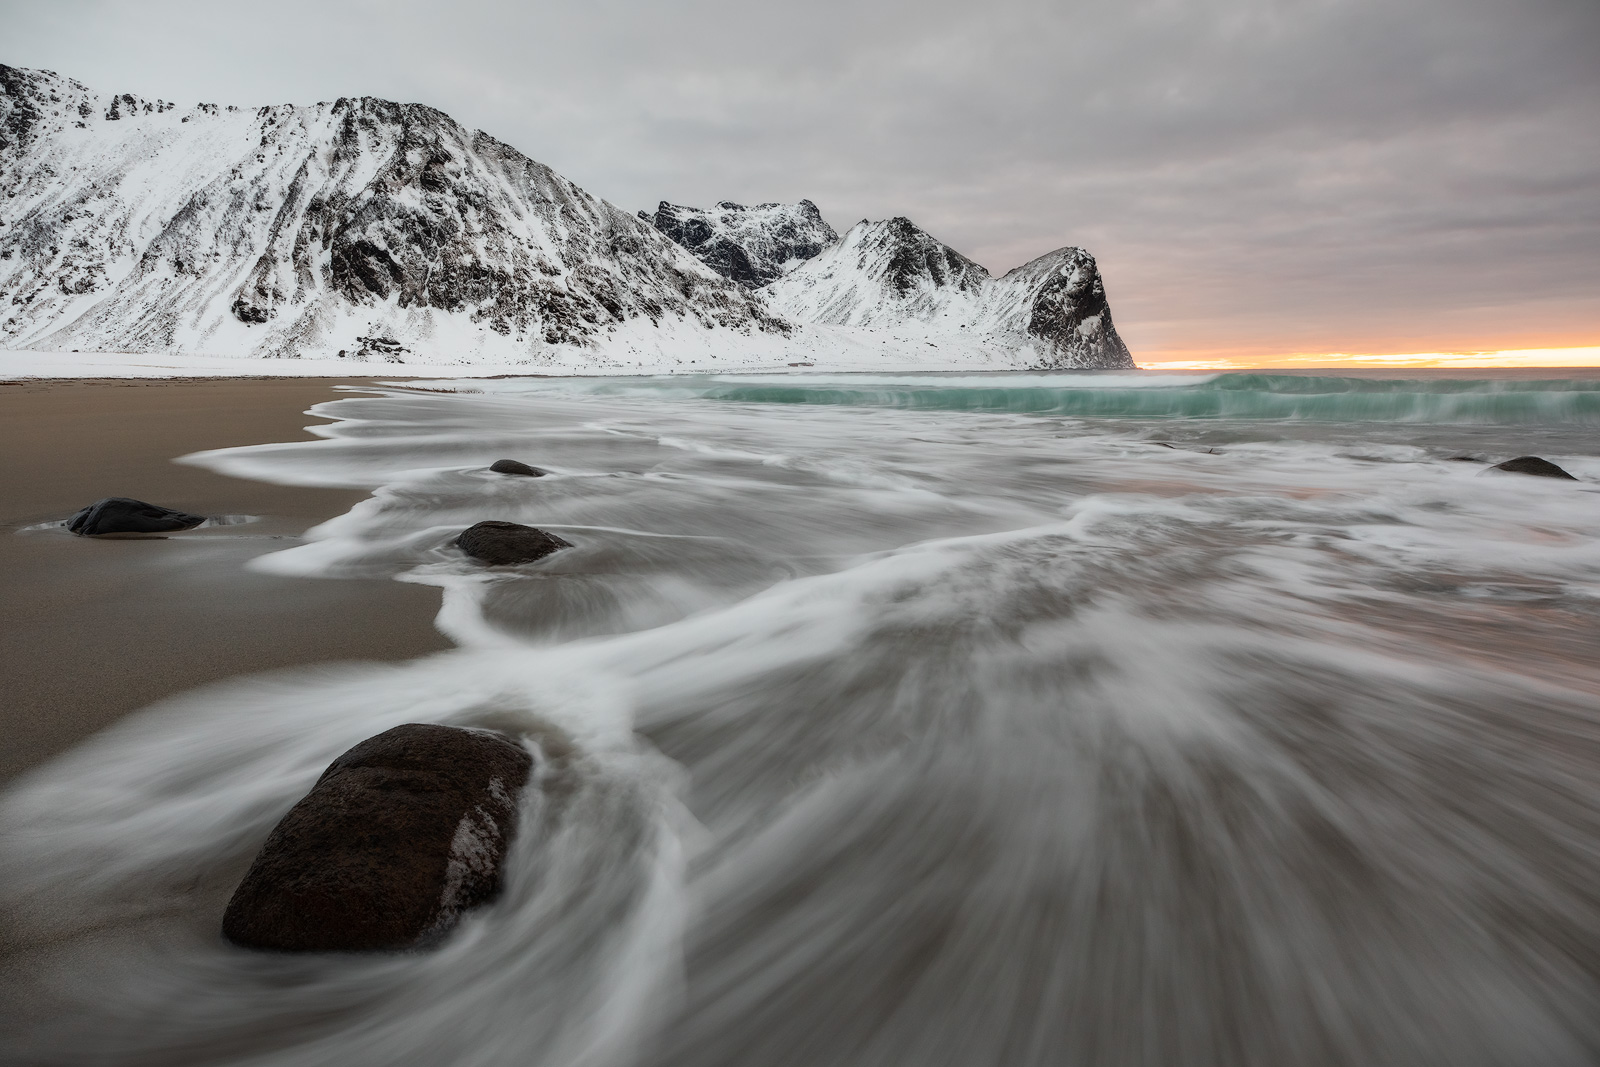 Waves hitting Unstad Beach as sunset peaks through a break in the clouds behind snow-capped mountains.